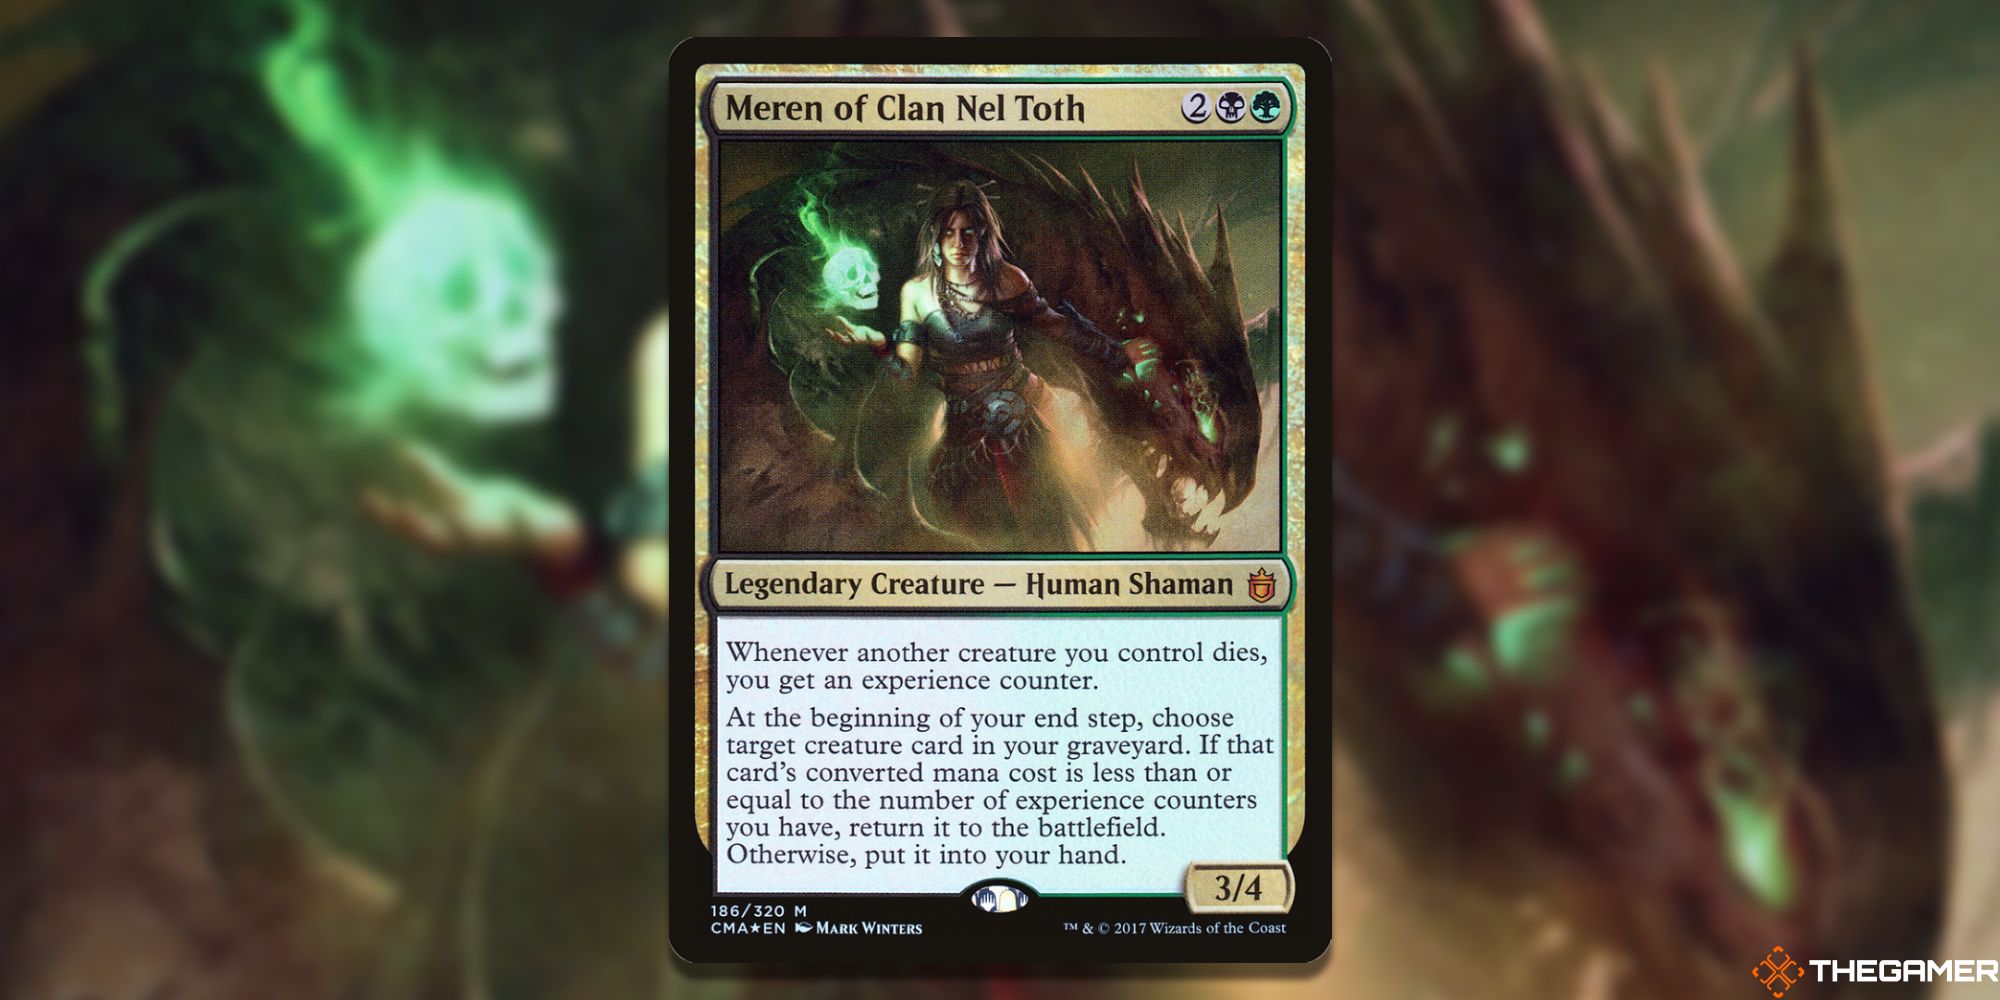 Magic the Gathering Creature Types With The Most Cards Meren of Clan Nel Toth